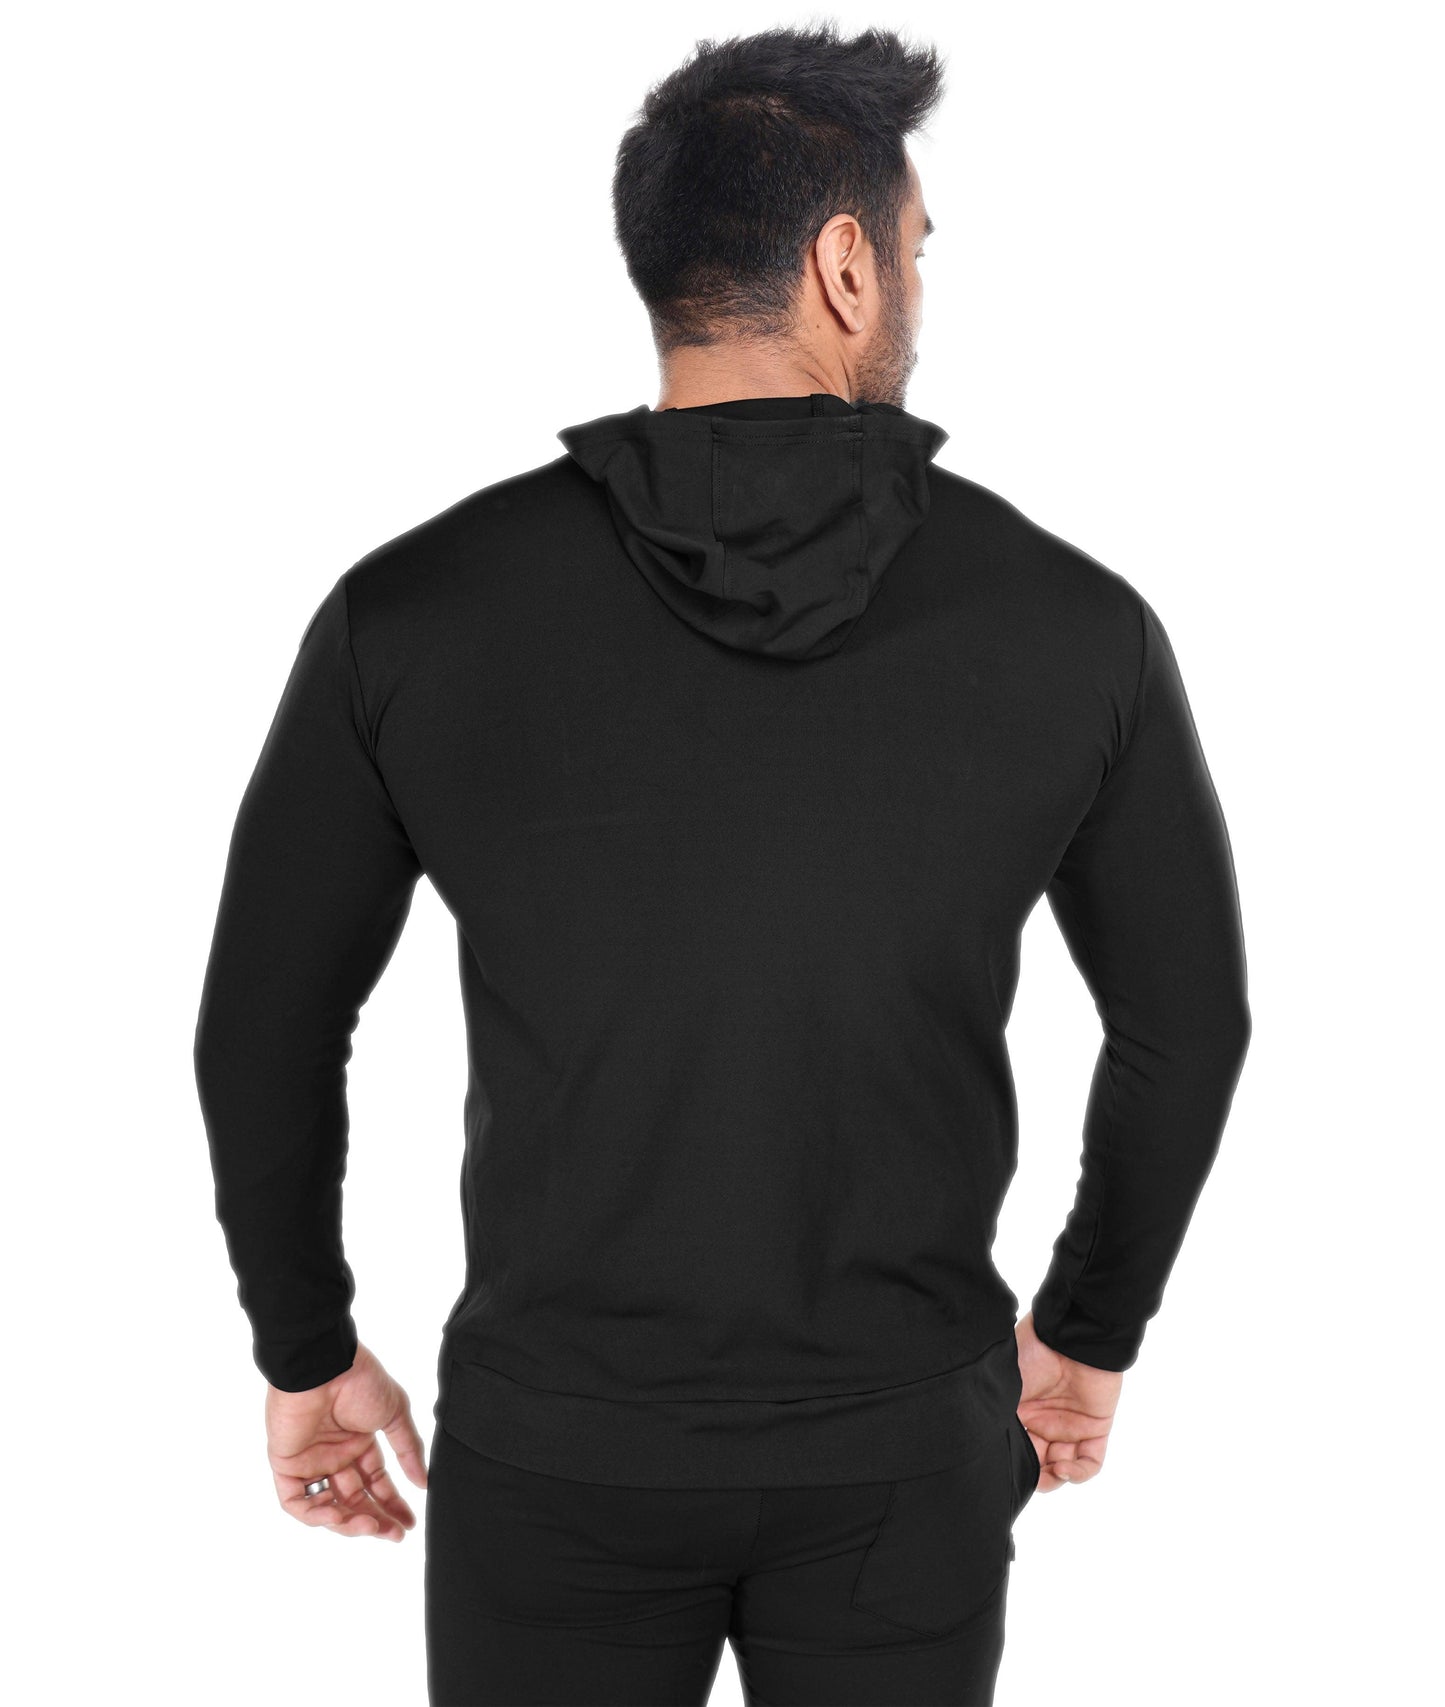 Dual Edition GymX Pullover: Lush Green - Sale - GymX